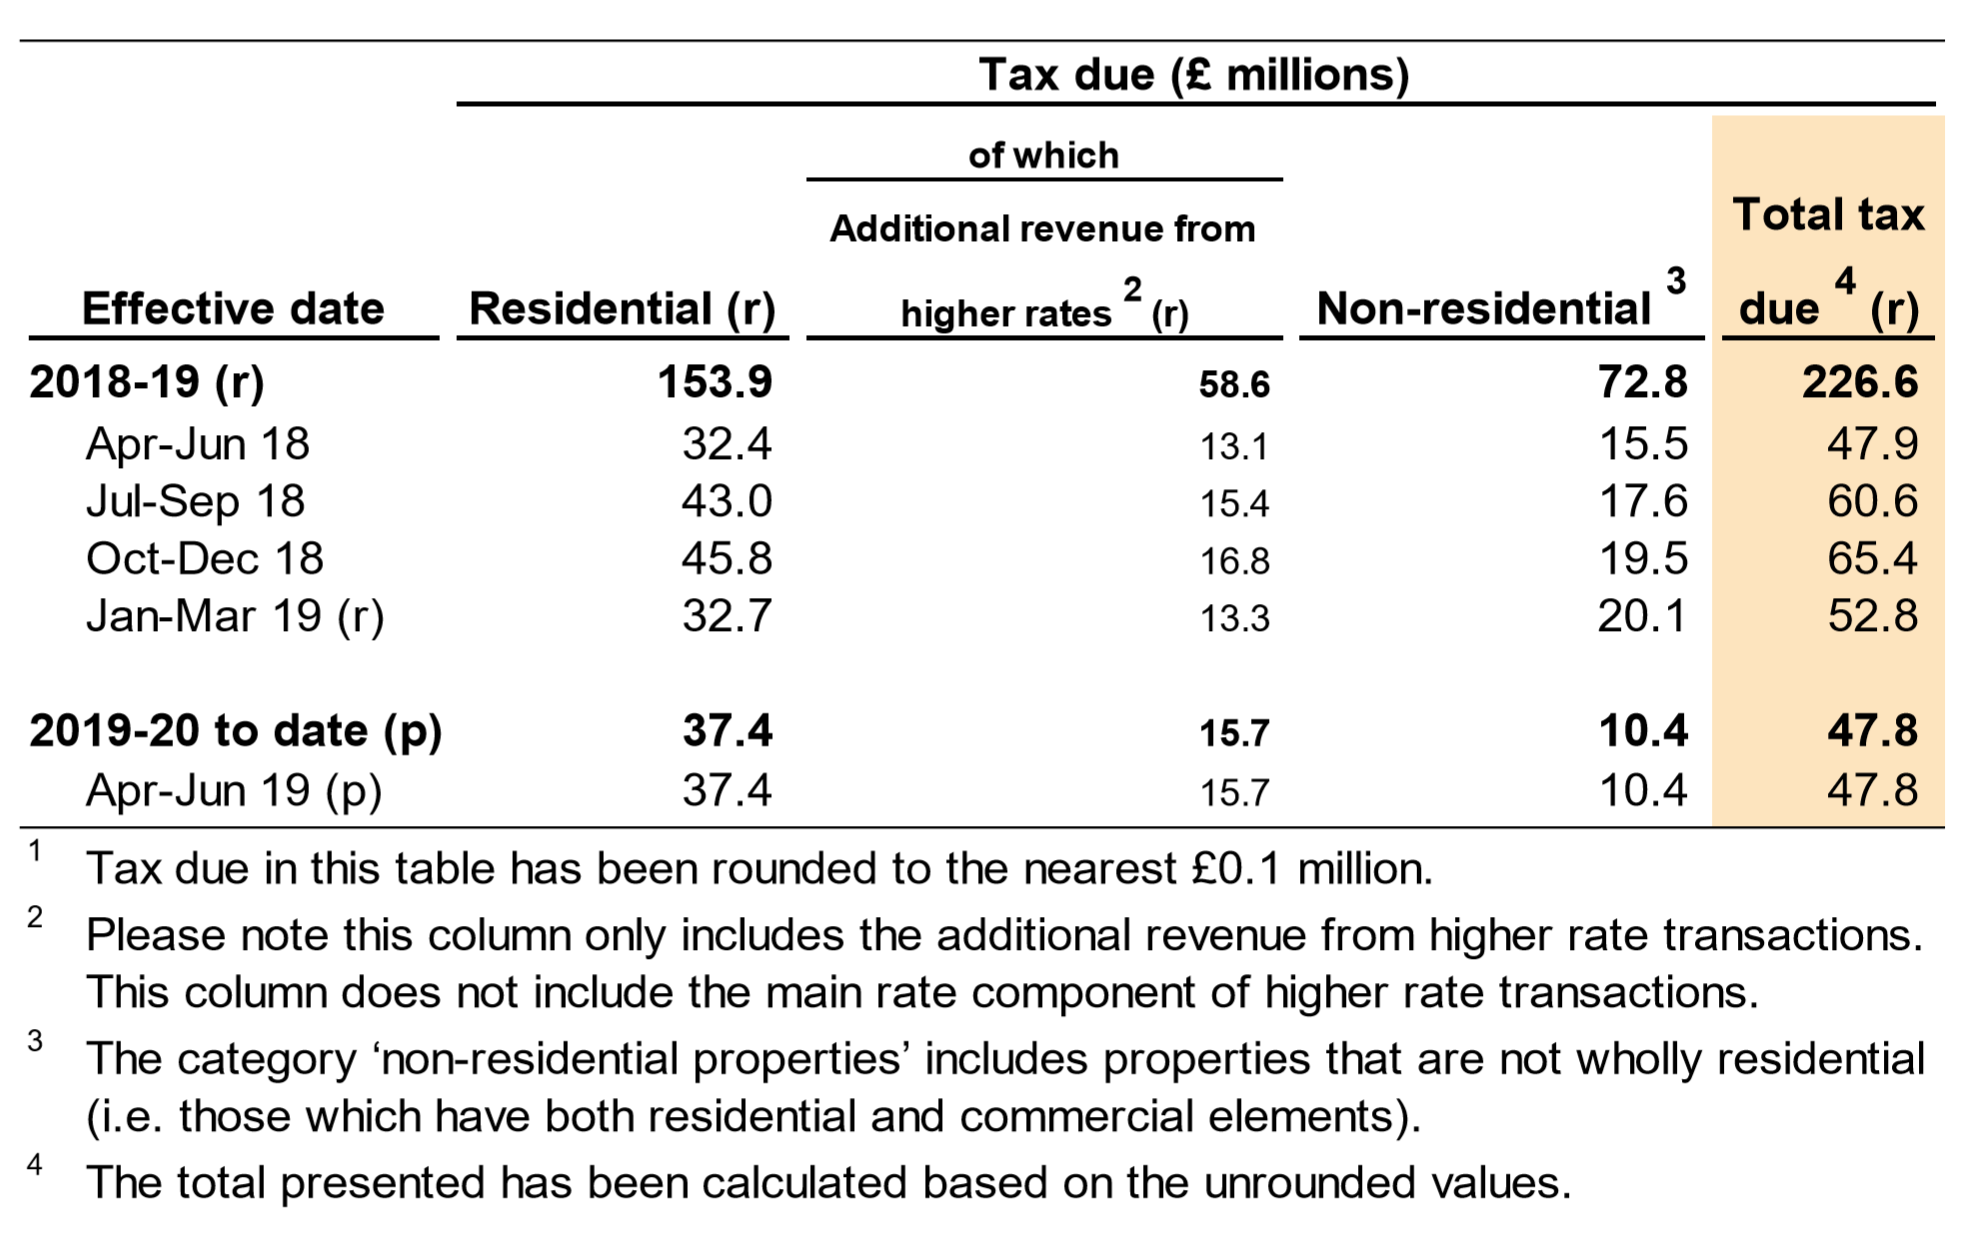 Figure 2.2 shows the tax due on reported notifiable transactions, by the quarter and year in which the transactions were effective. Figure 2.2 also shows a breakdown for residential and non-residential transactions.